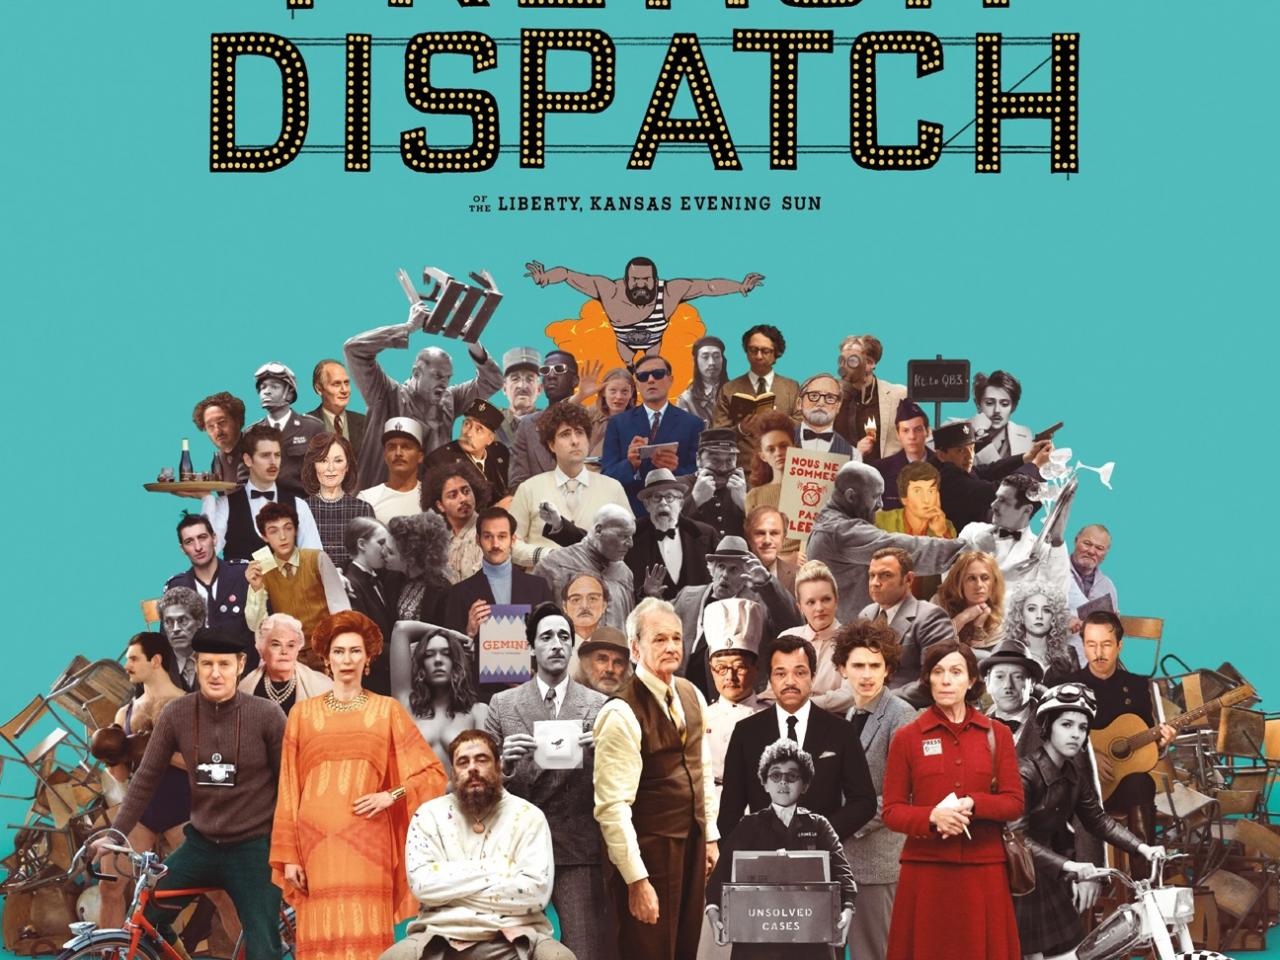 The french dispatch